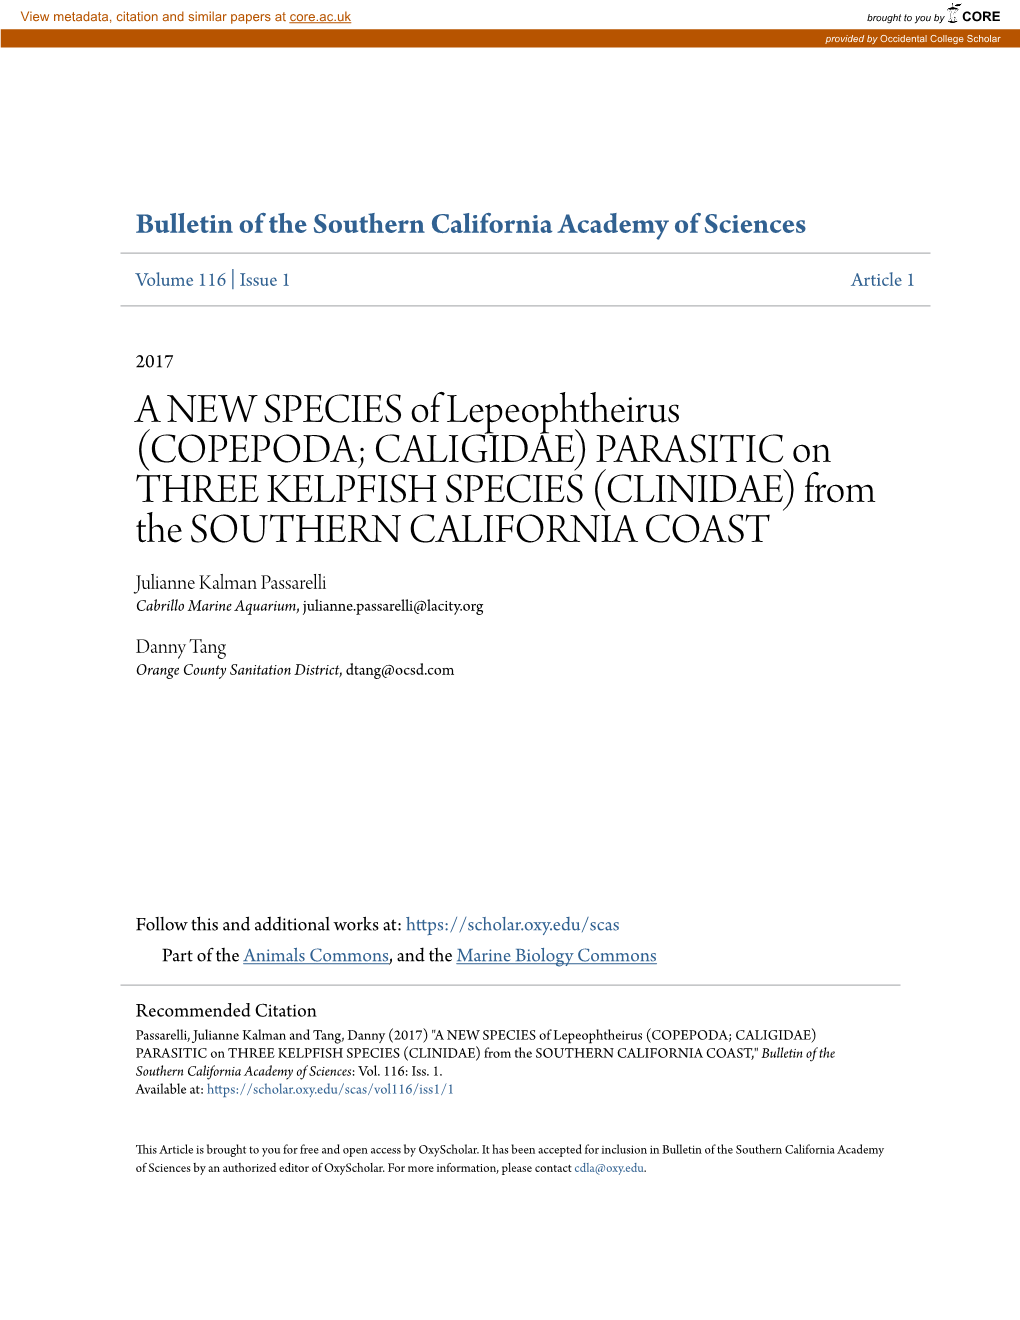 A NEW SPECIES of Lepeophtheirus